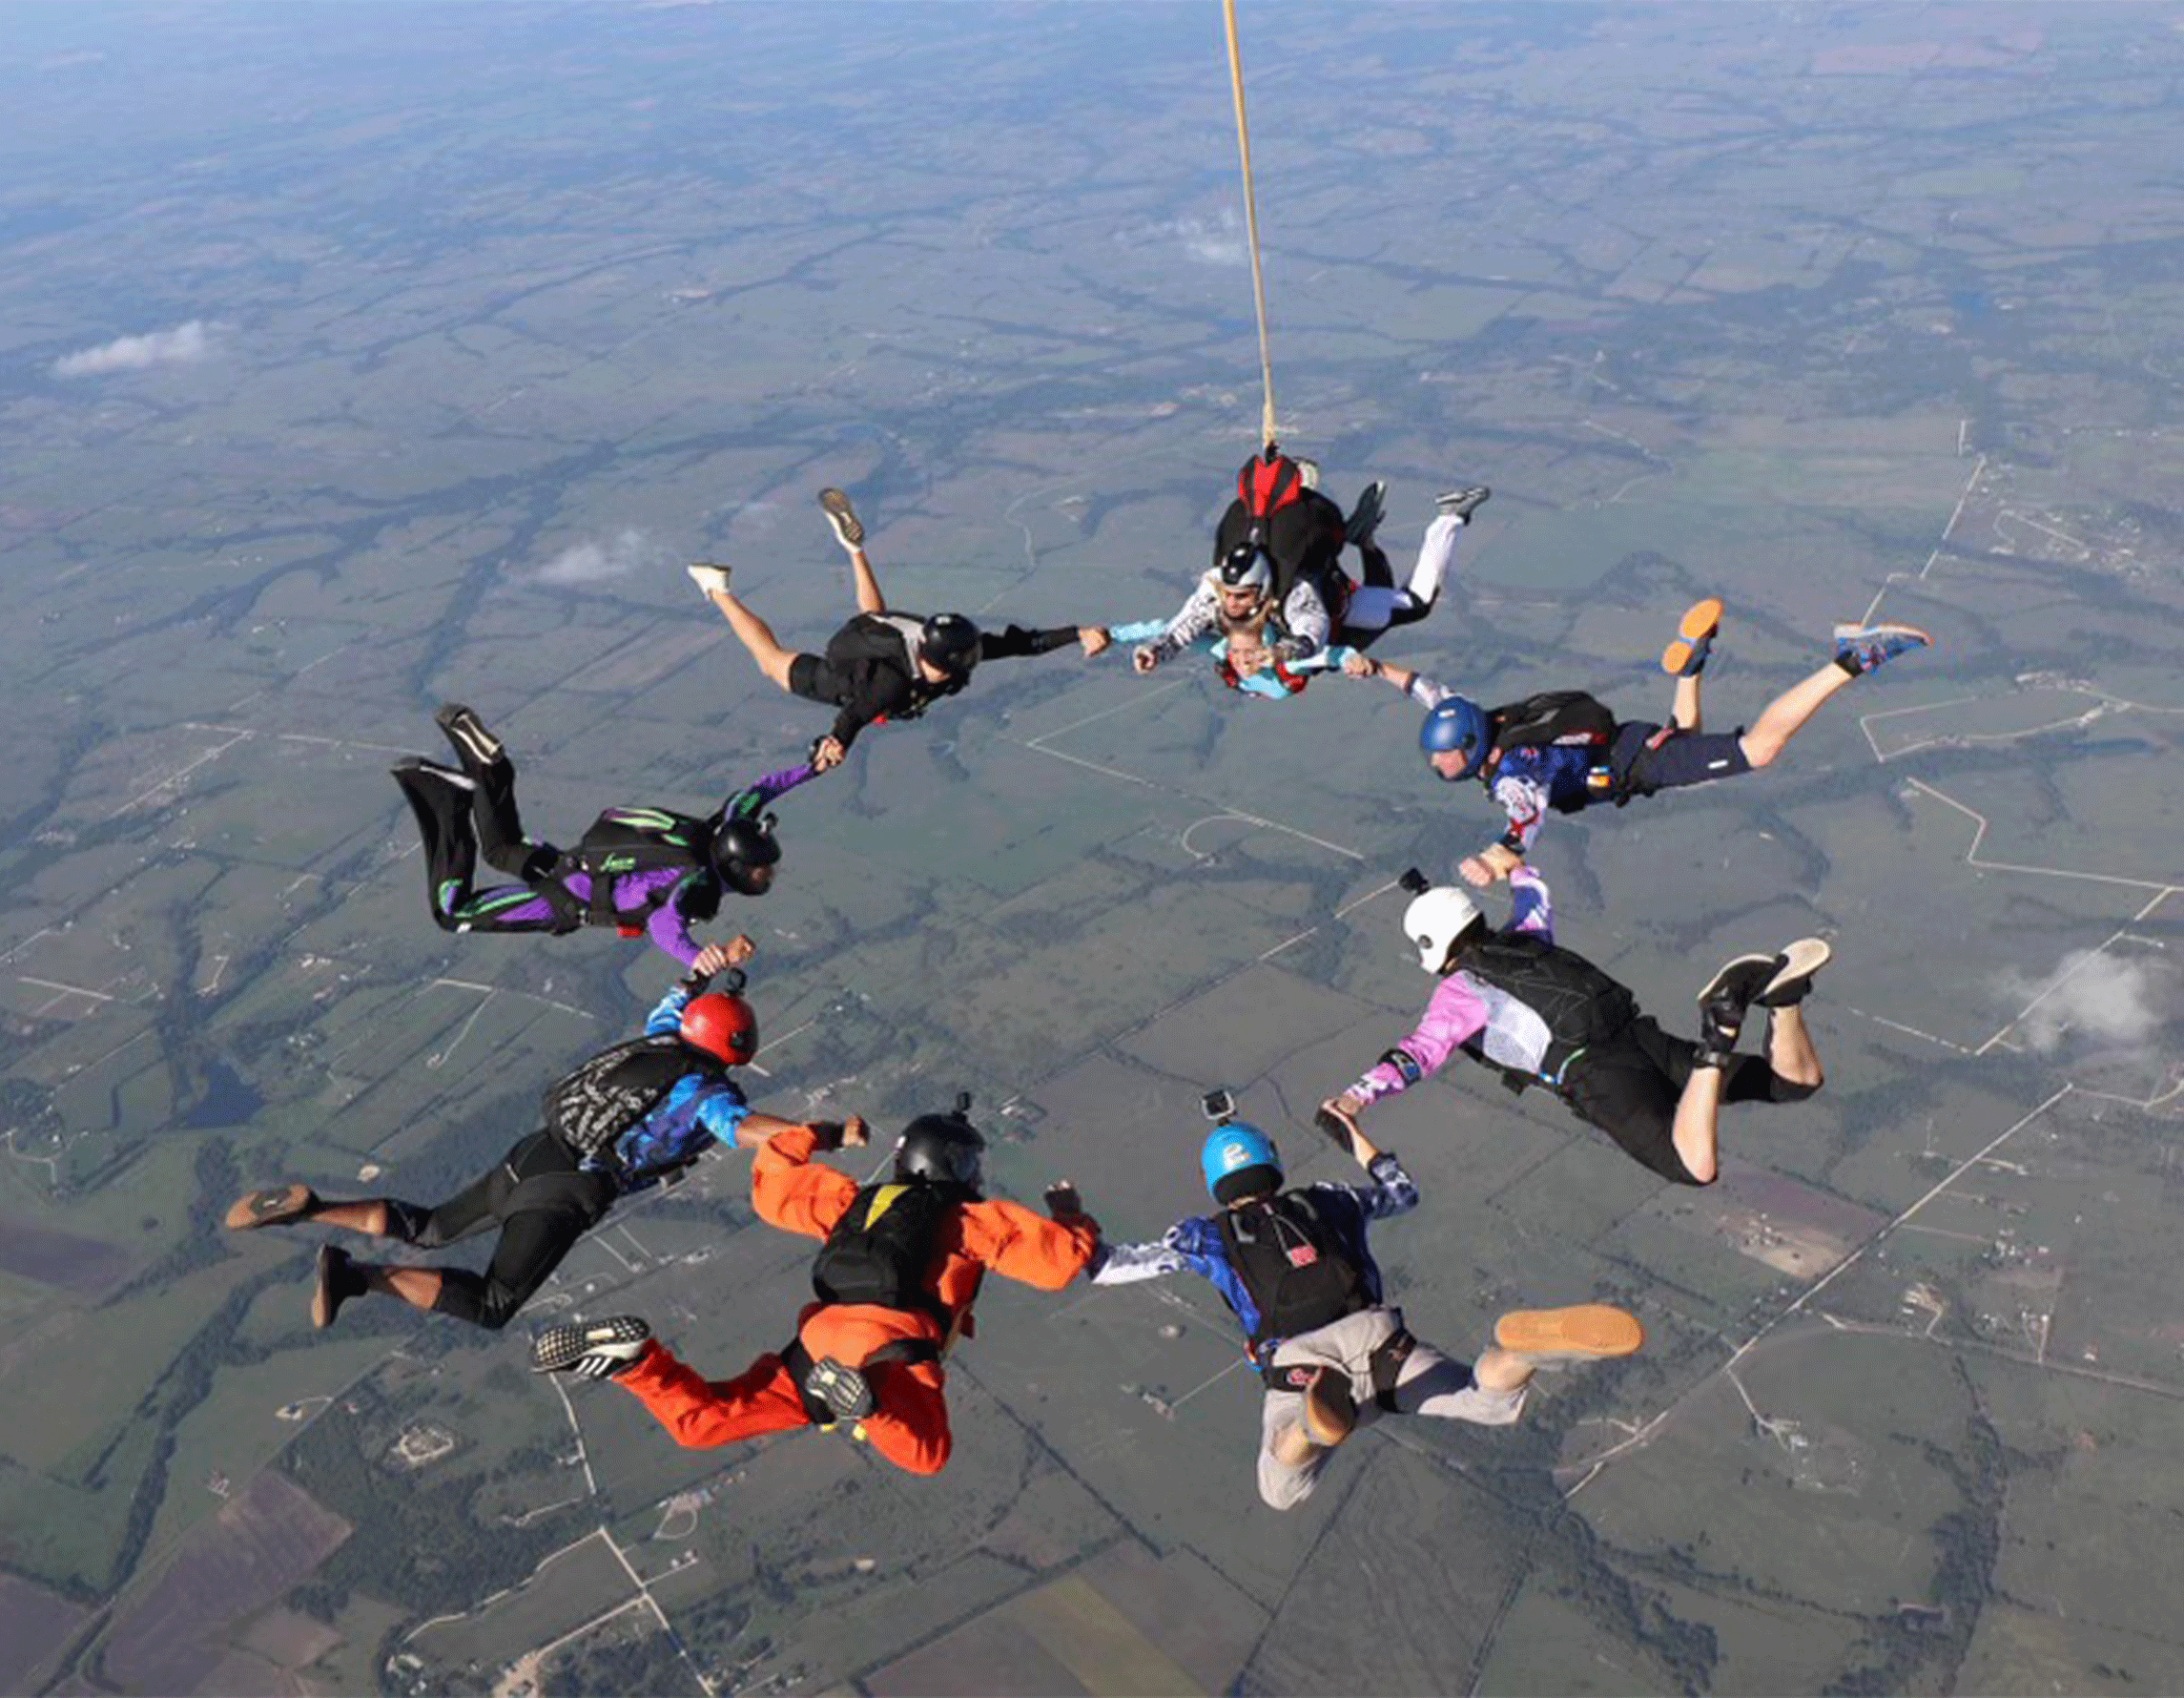 Group of skydivers holding hands in a circle in mid-air